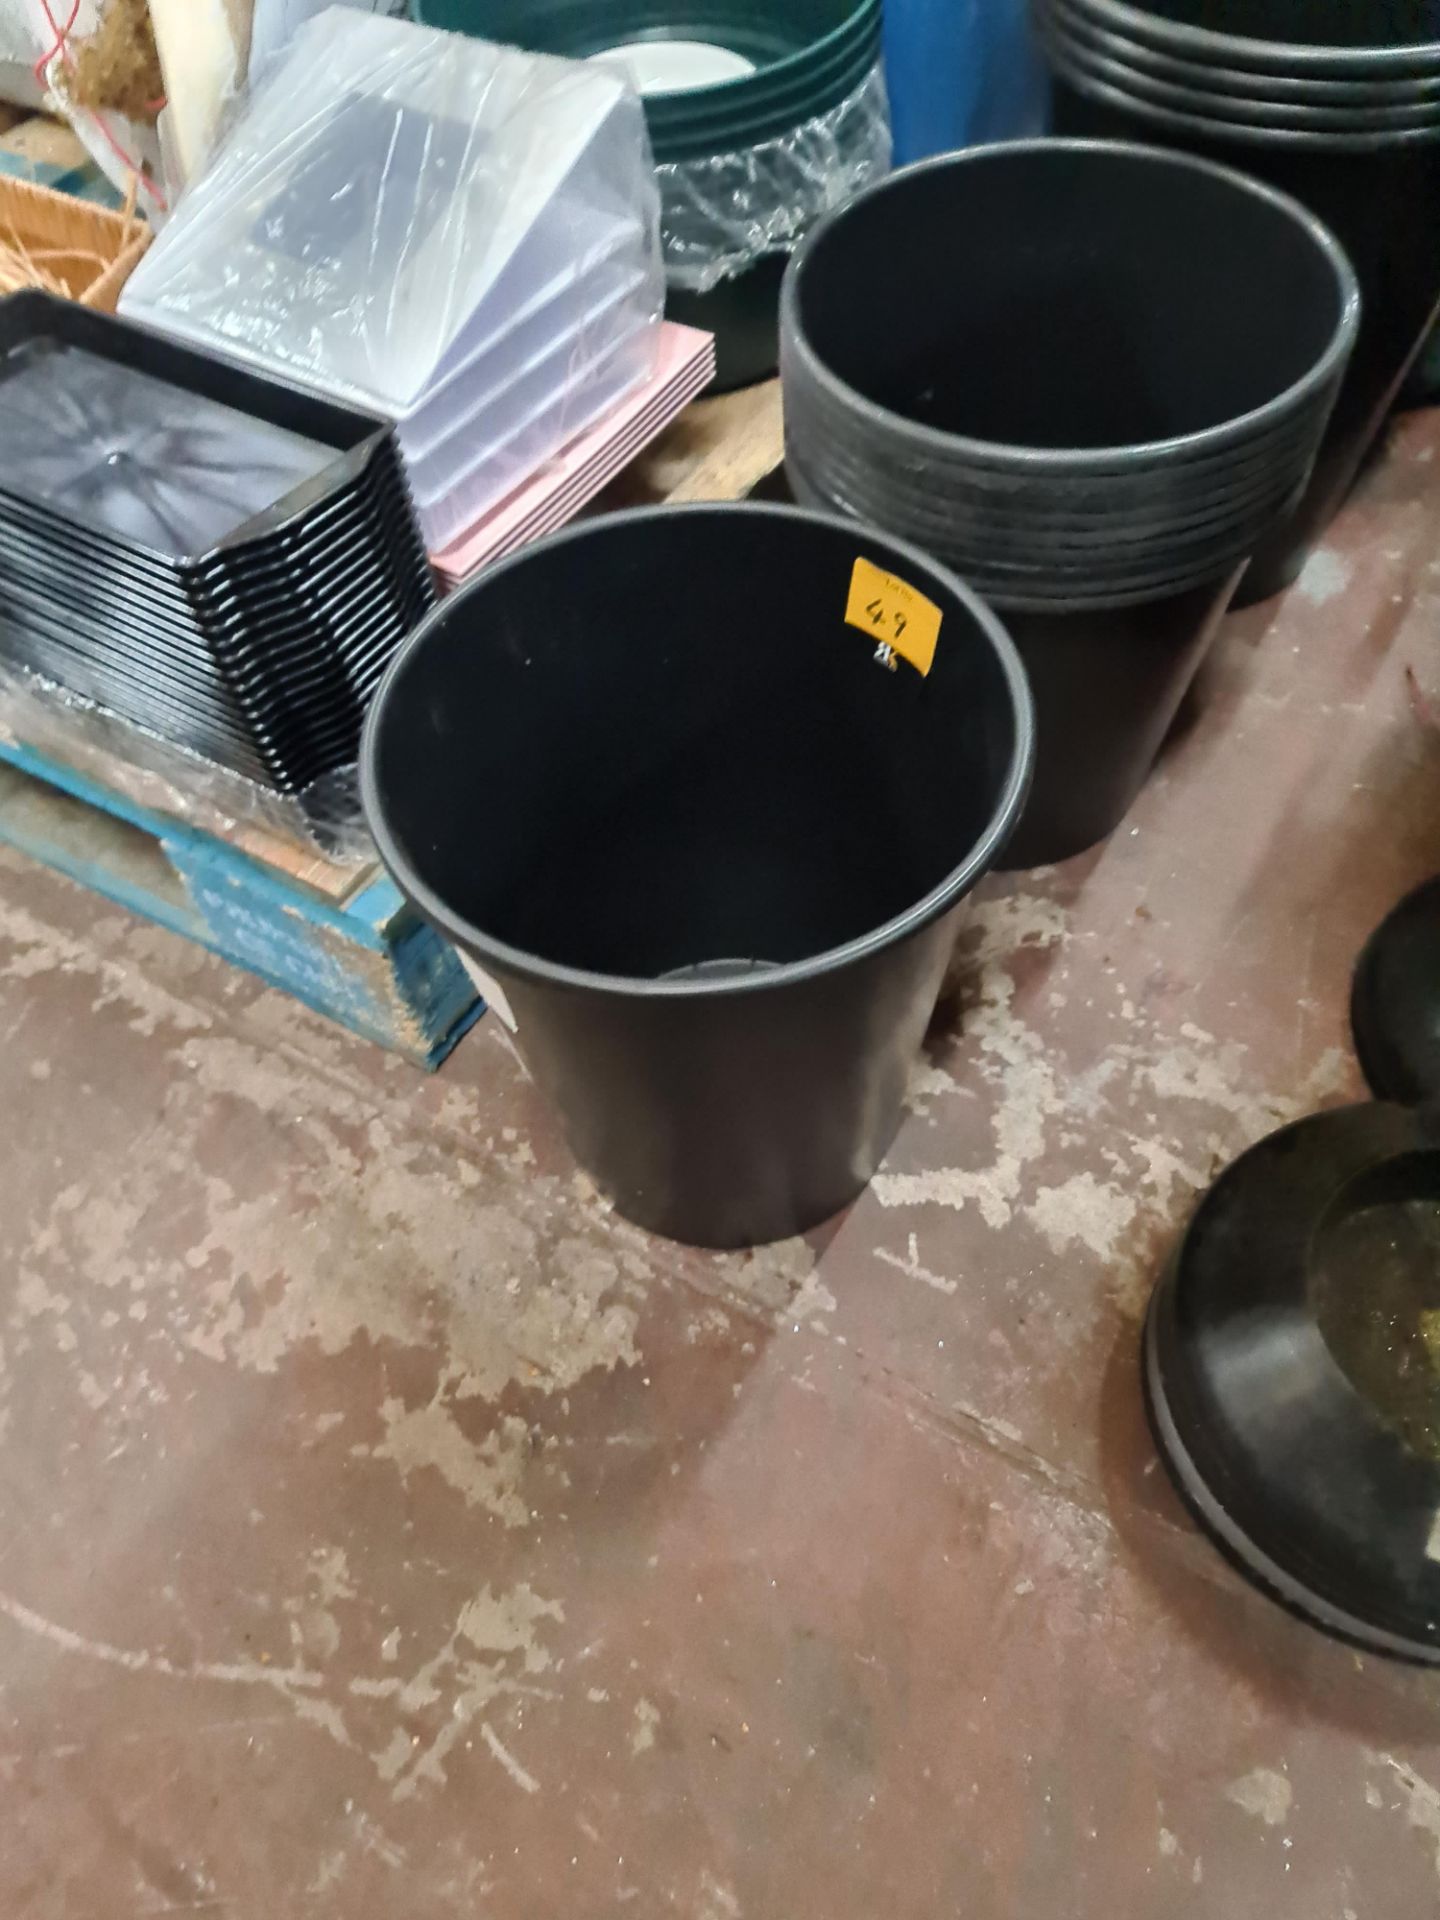 16 off assorted buckets - the contents of a row - Image 2 of 4